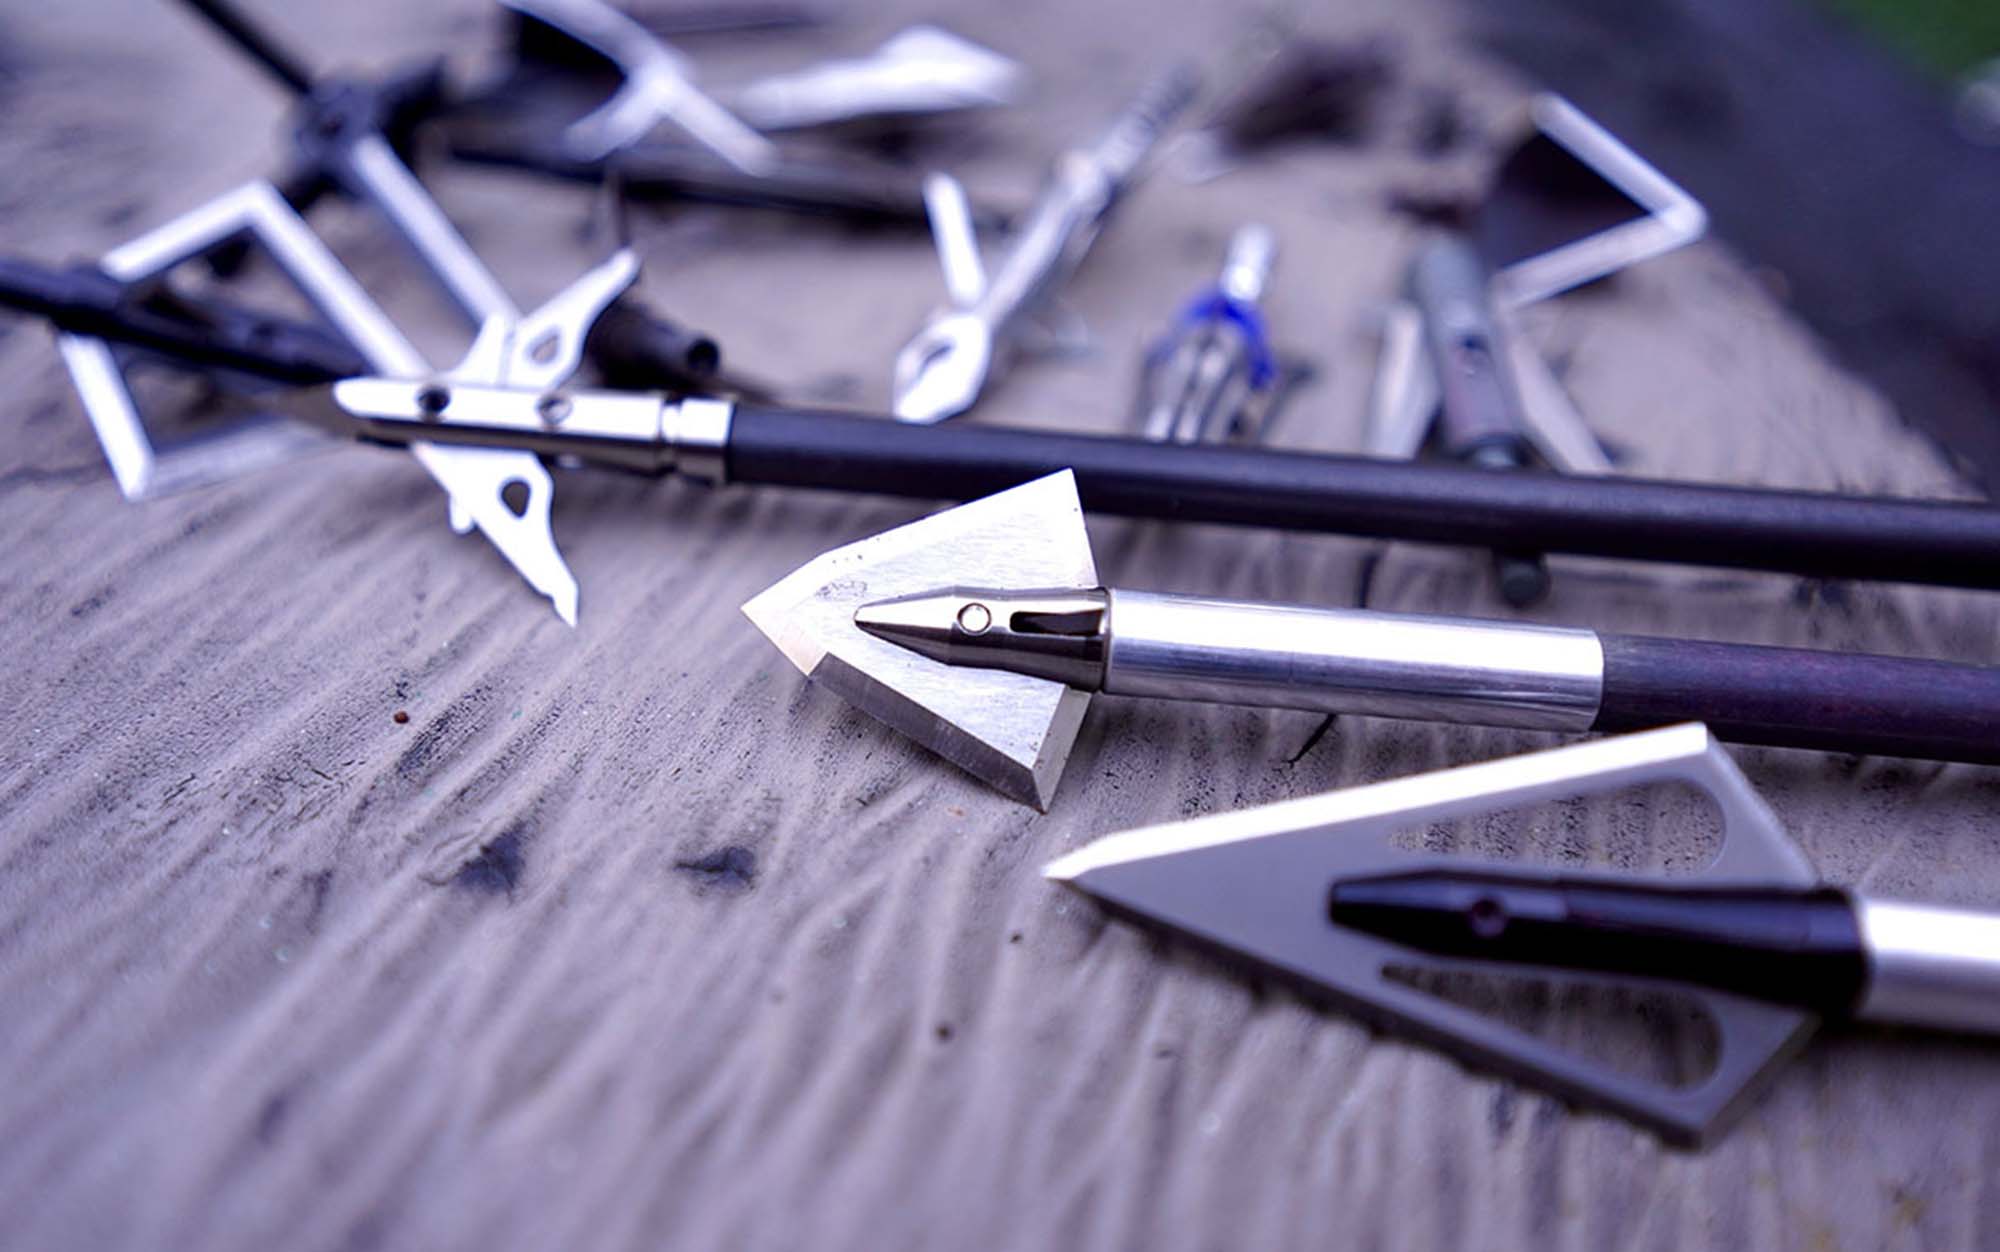 The different types of broadheads laying on table.